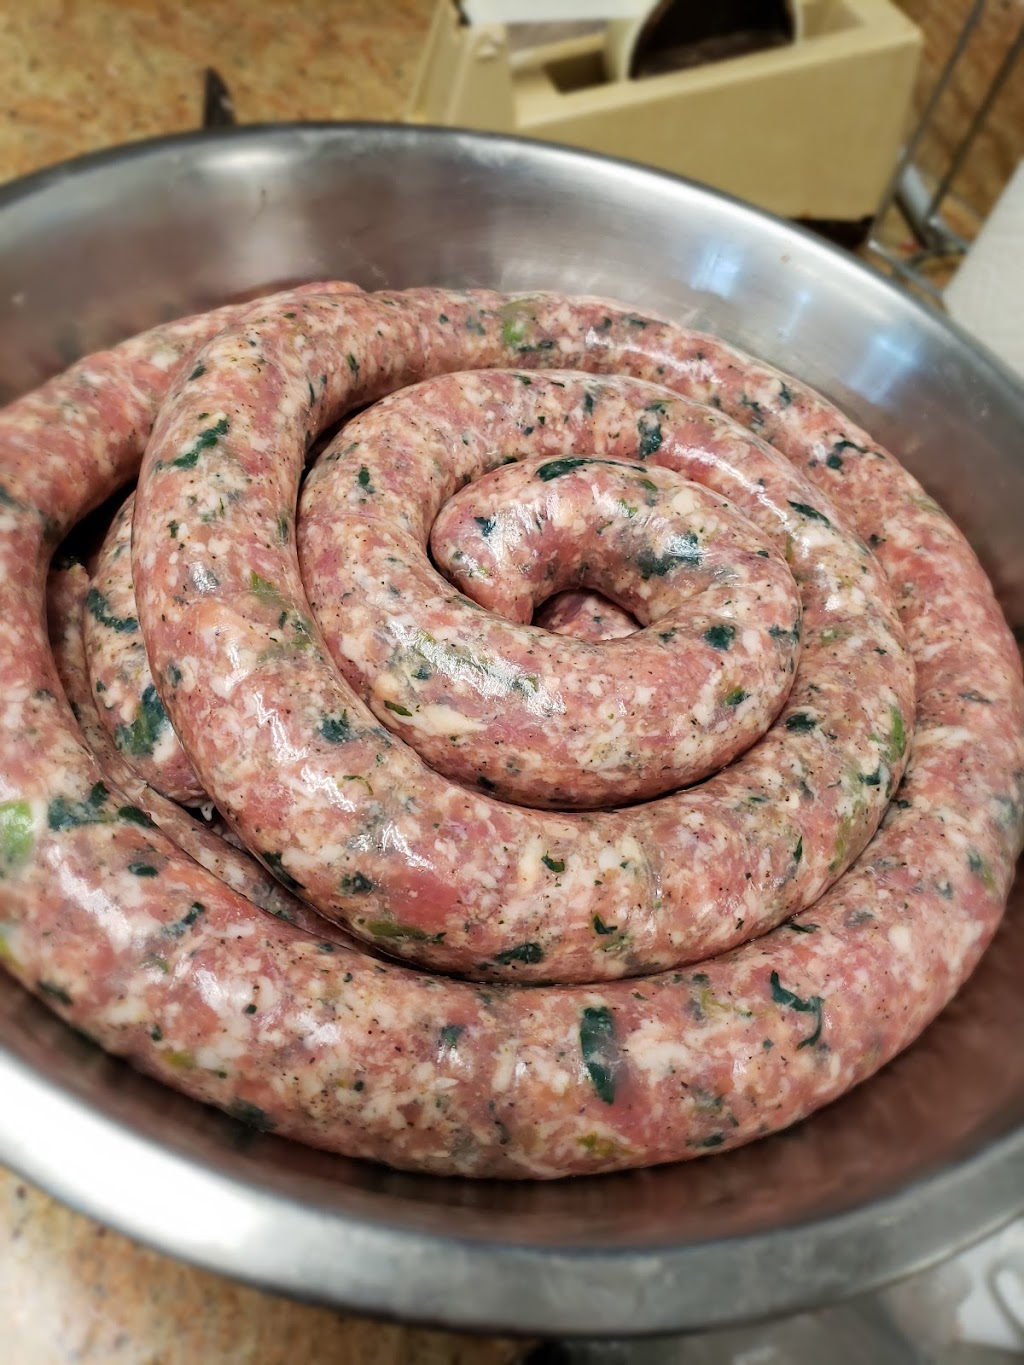 Geromes Sausage Company | 934 Woodbourne Rd, Levittown, PA 19057 | Phone: (215) 943-7663